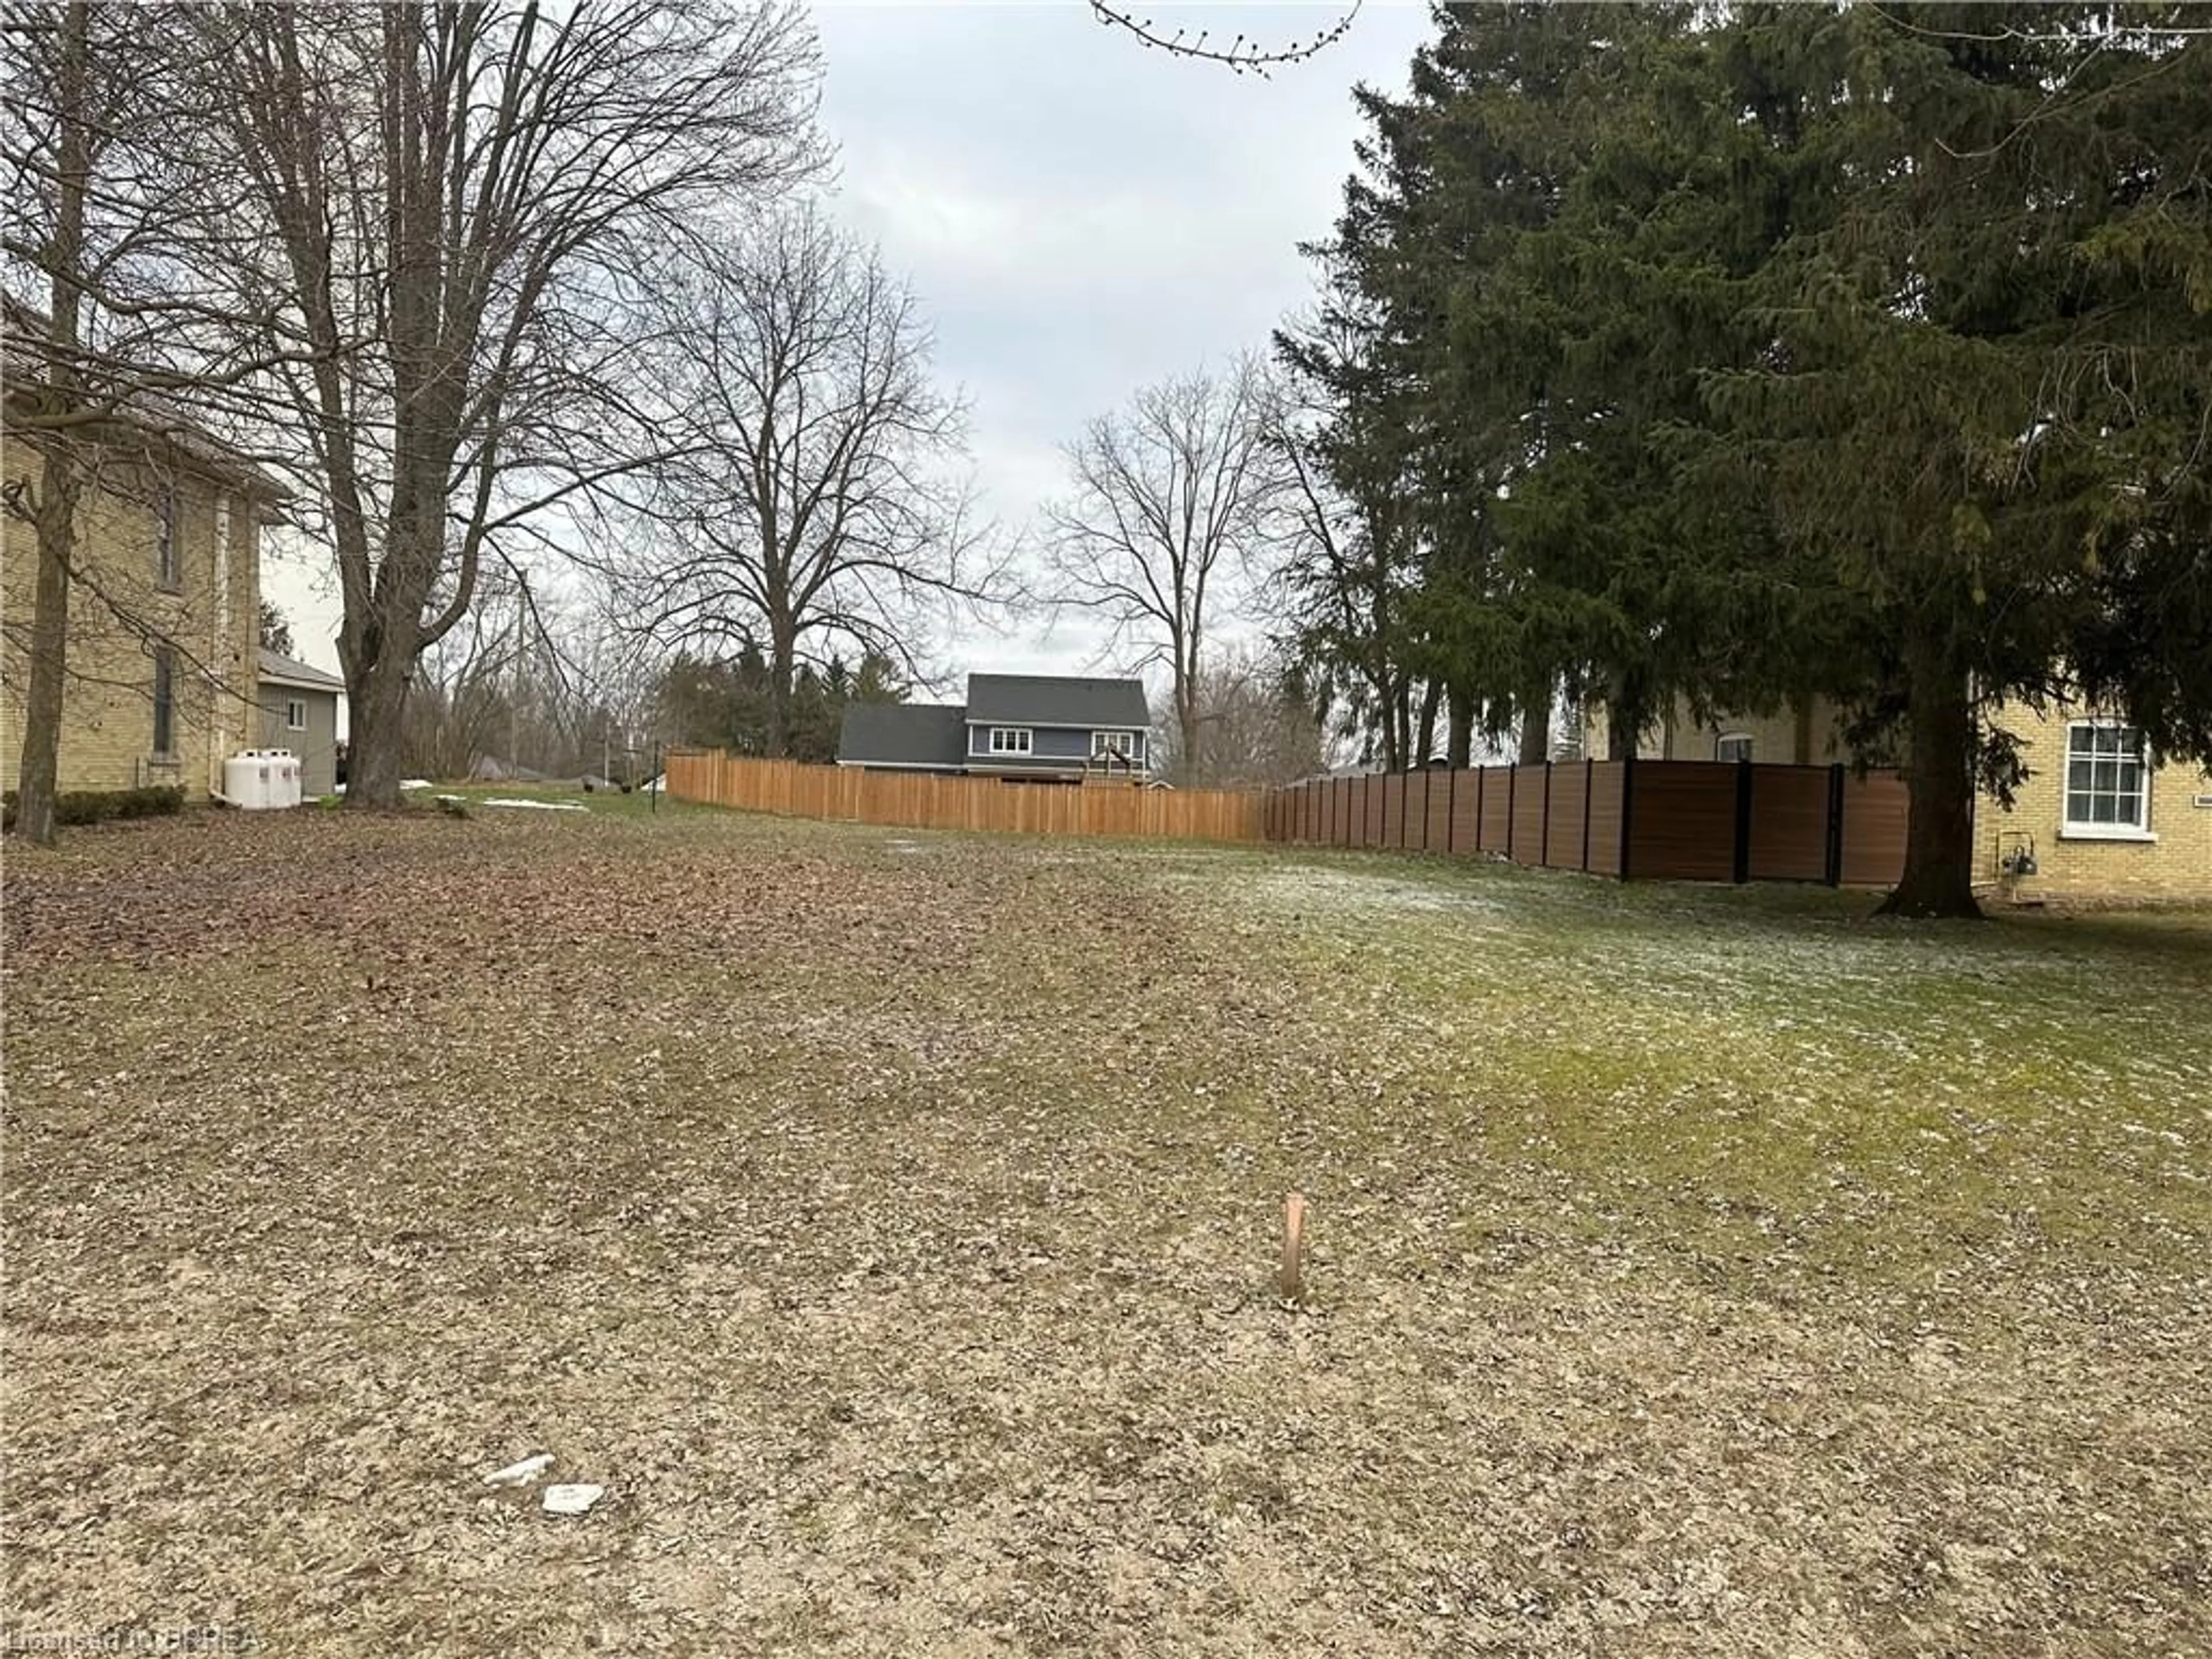 Home with unknown exterior material for LOT 13 N Queen St, Paisley Ontario N0G 2N0